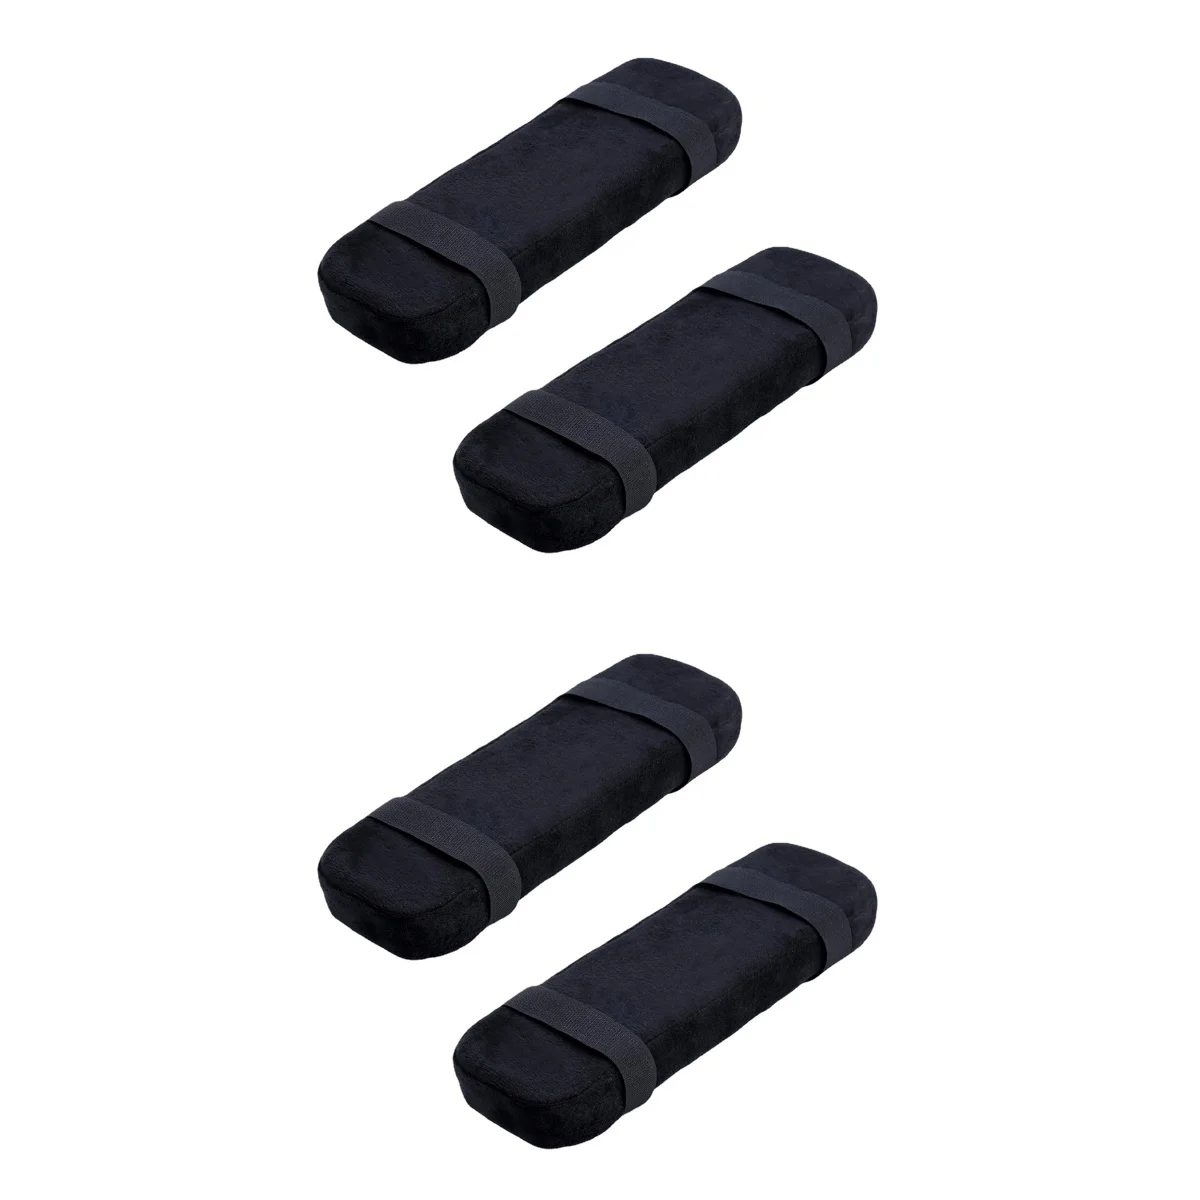 

4 Pcs Armrest Pad Wheelchair Cushions Pads Seat for Polyester Gaming Pillows Office Elbow